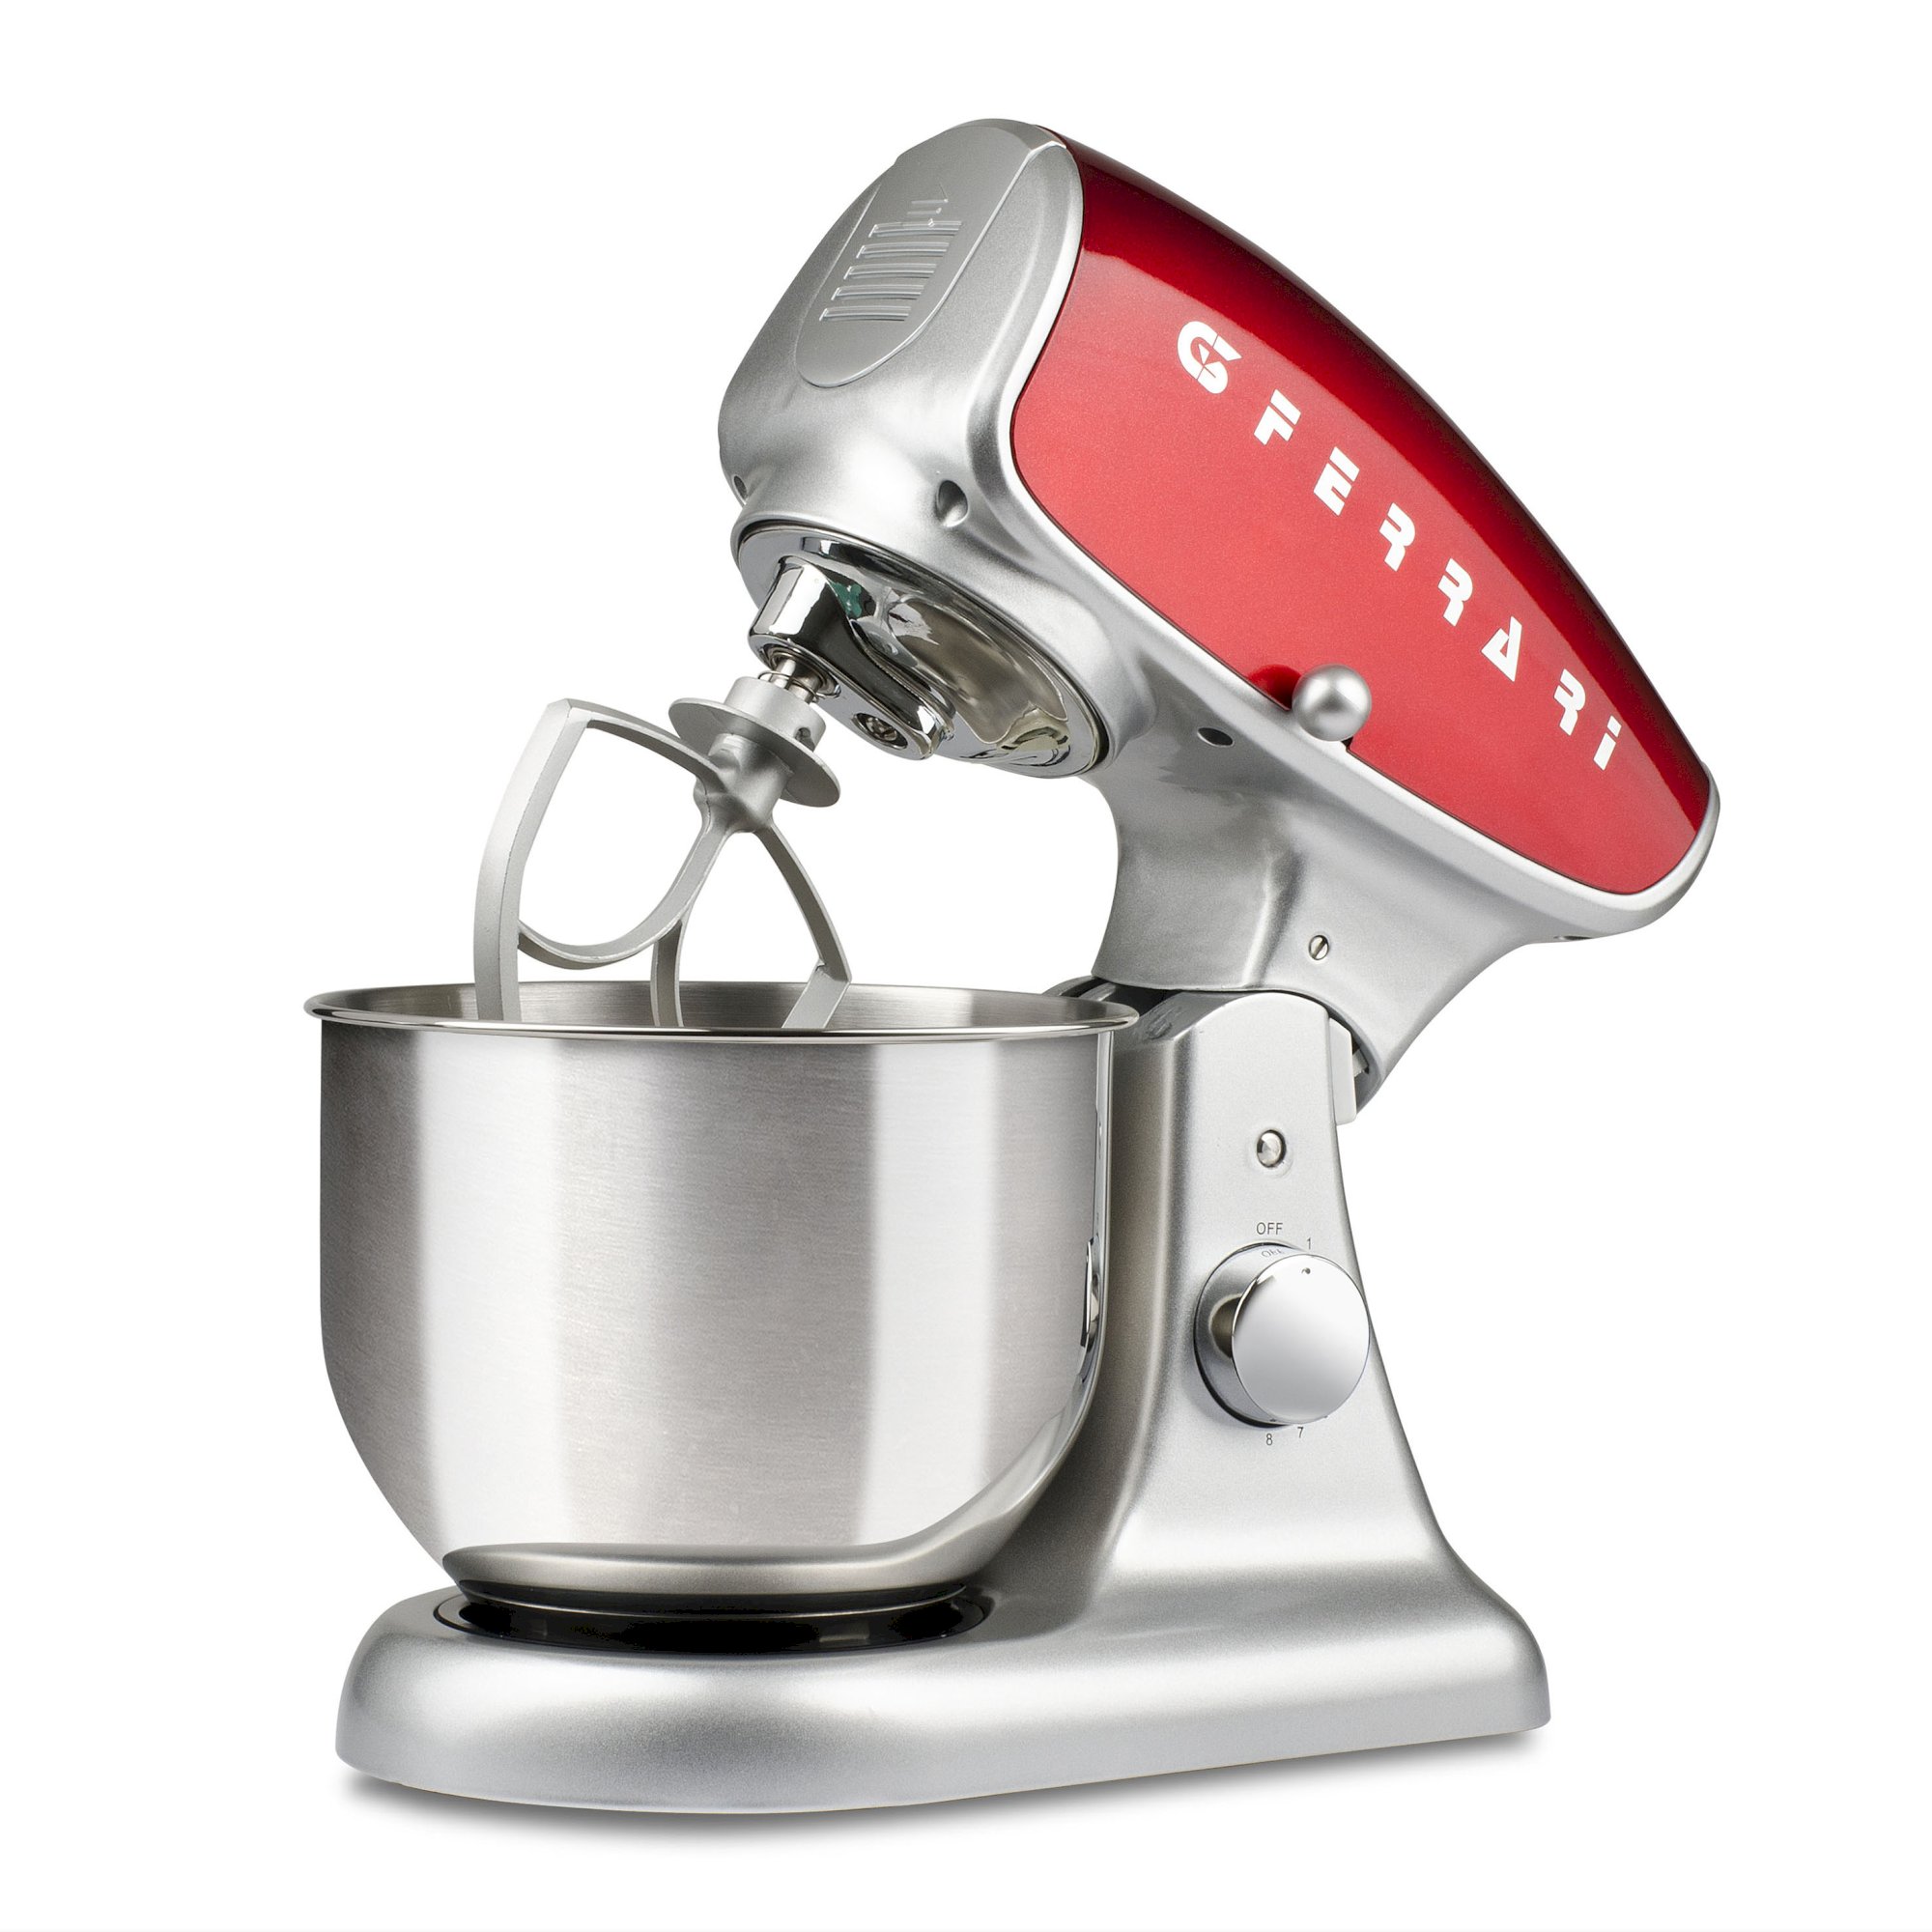 G2007506, Pastaio Deluxe, stand mixer, 5,2L, 1200W, silver/red